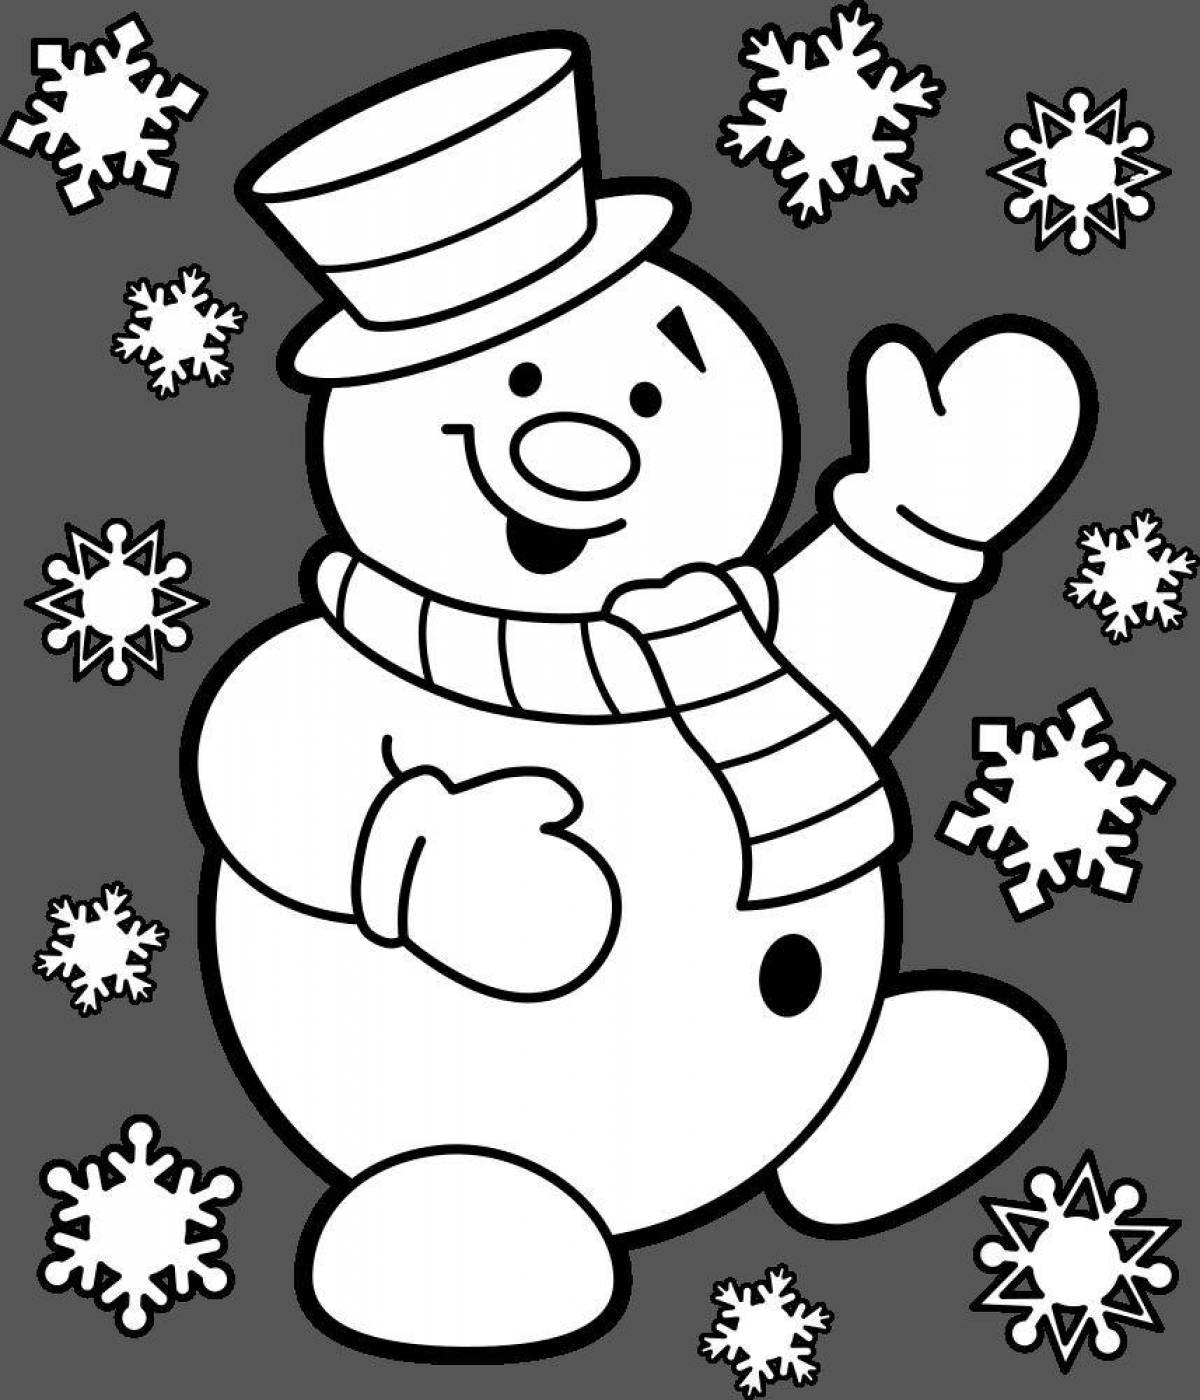 Coloring page funny snowman for birthday